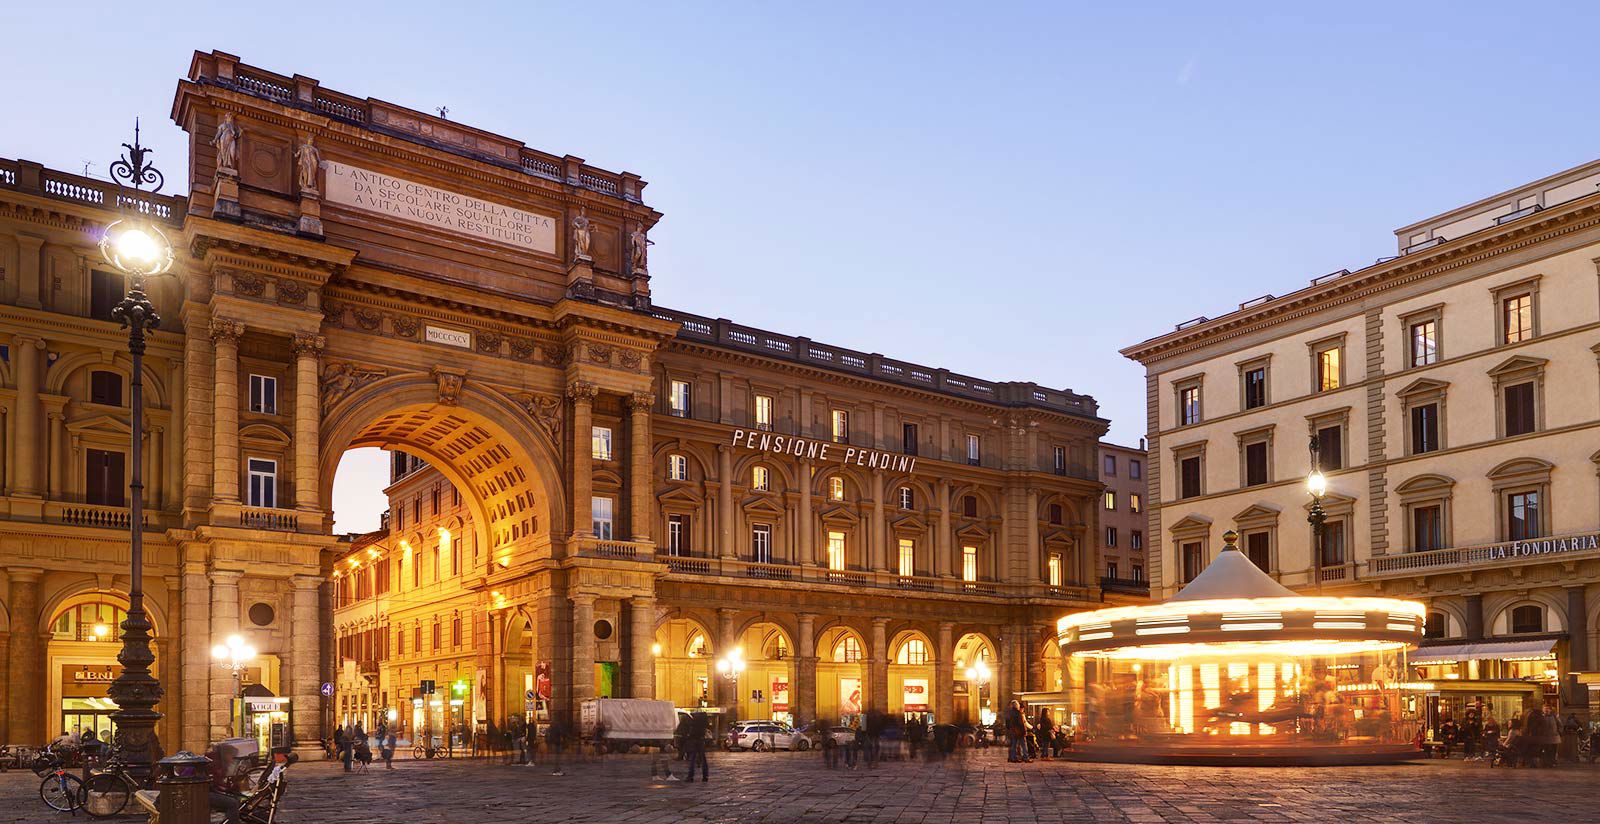 STAYING AT PENDINI, 3 STAR HOTEL IN CENTRAL FLORENCE 4